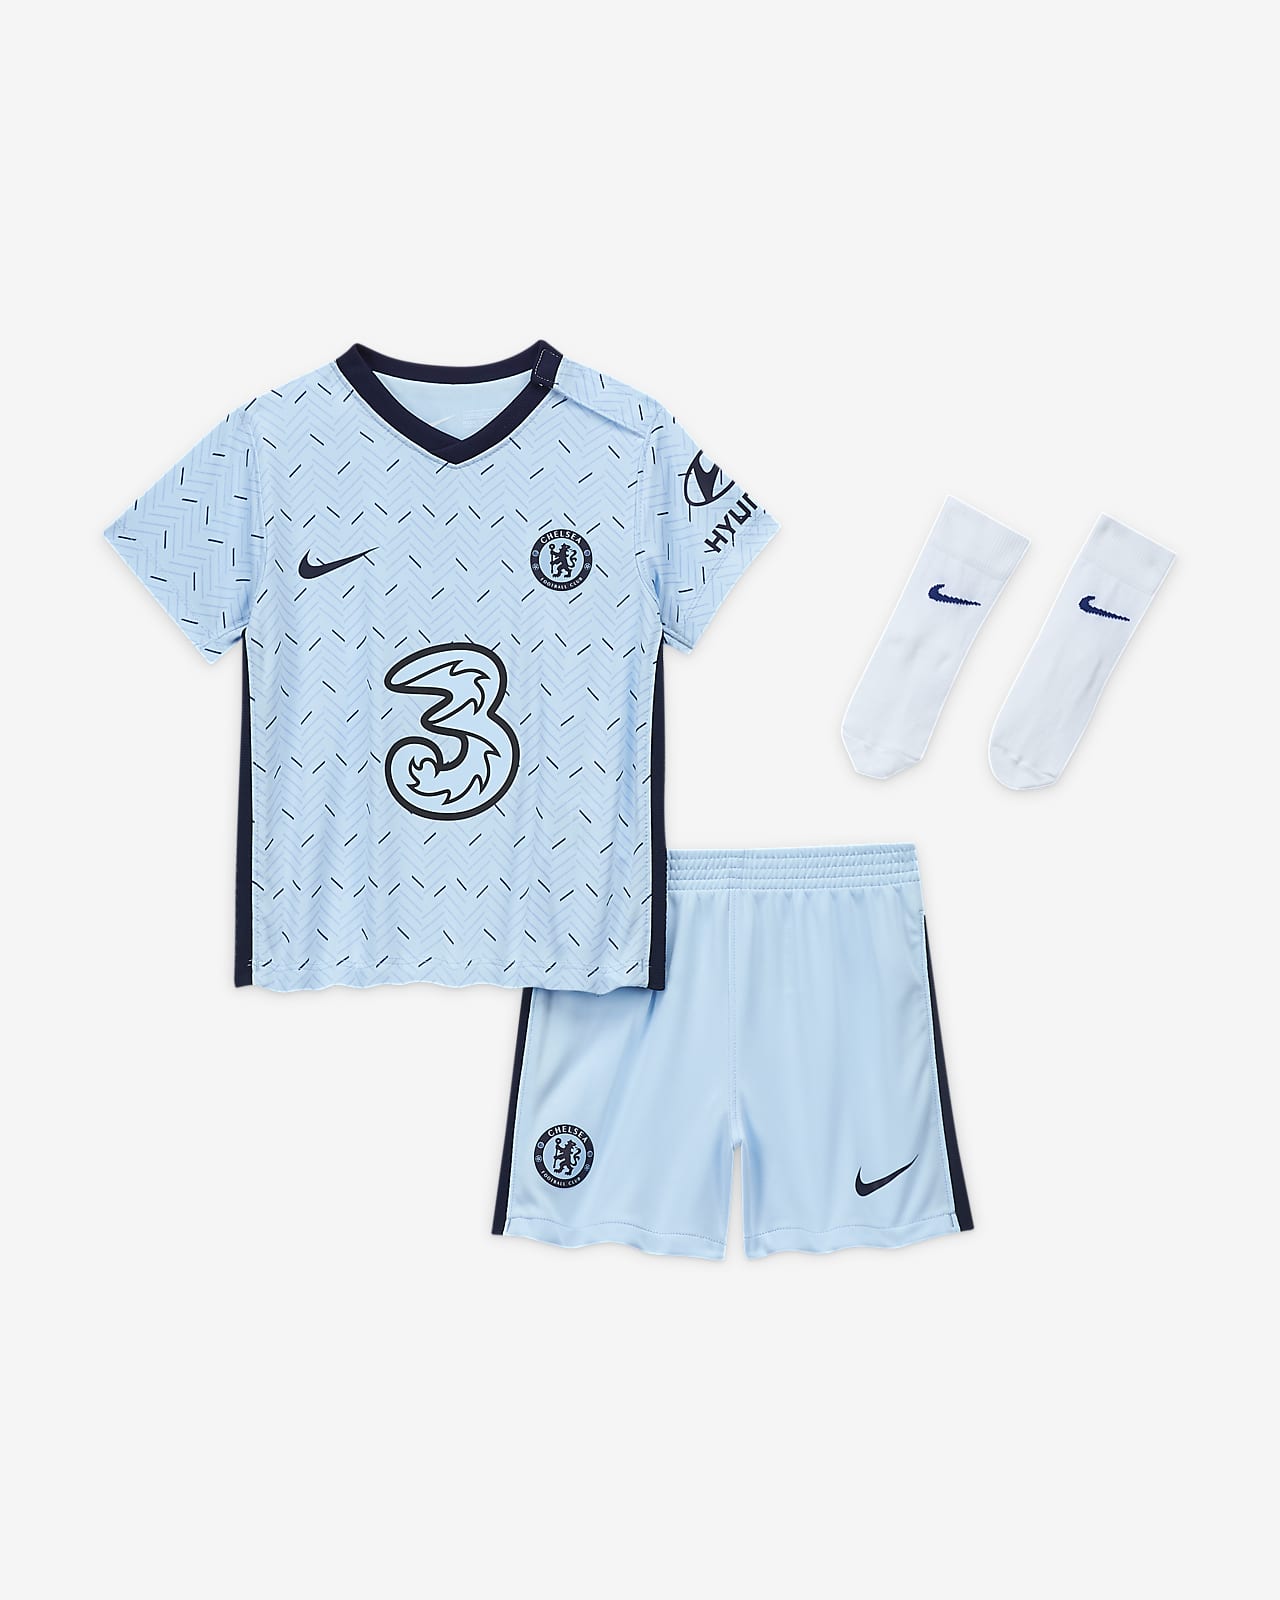 Chelsea F.C. 2020/21 Away Baby and Toddler Football Kit. Nike MA